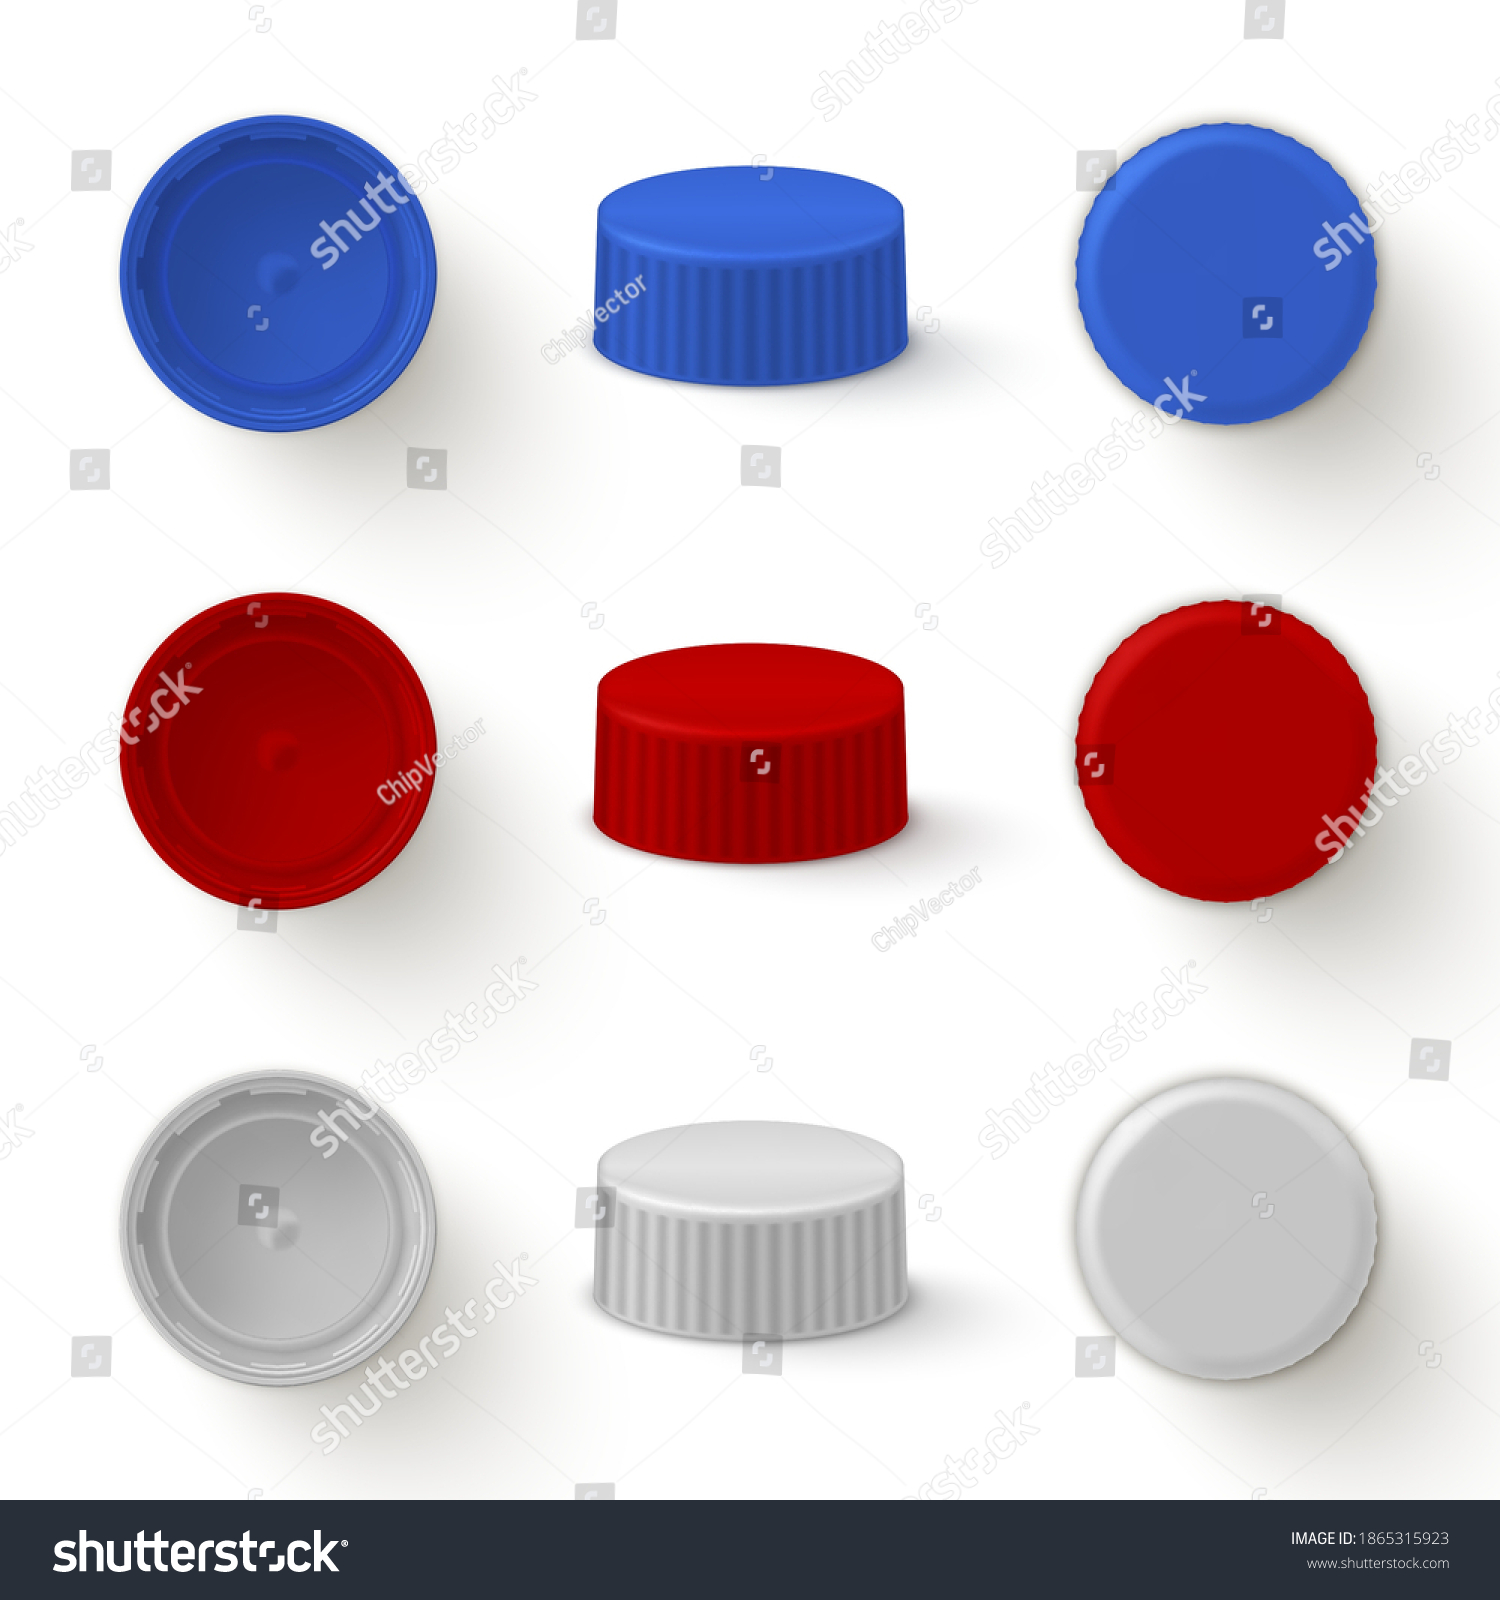 SVG of Caps plastic for bottles realistic mock ups set. Top, bottom, side view. Lids white, red, blue for drinks packaging. Place for your design, logo. Vector caps isolated collection illustration. svg